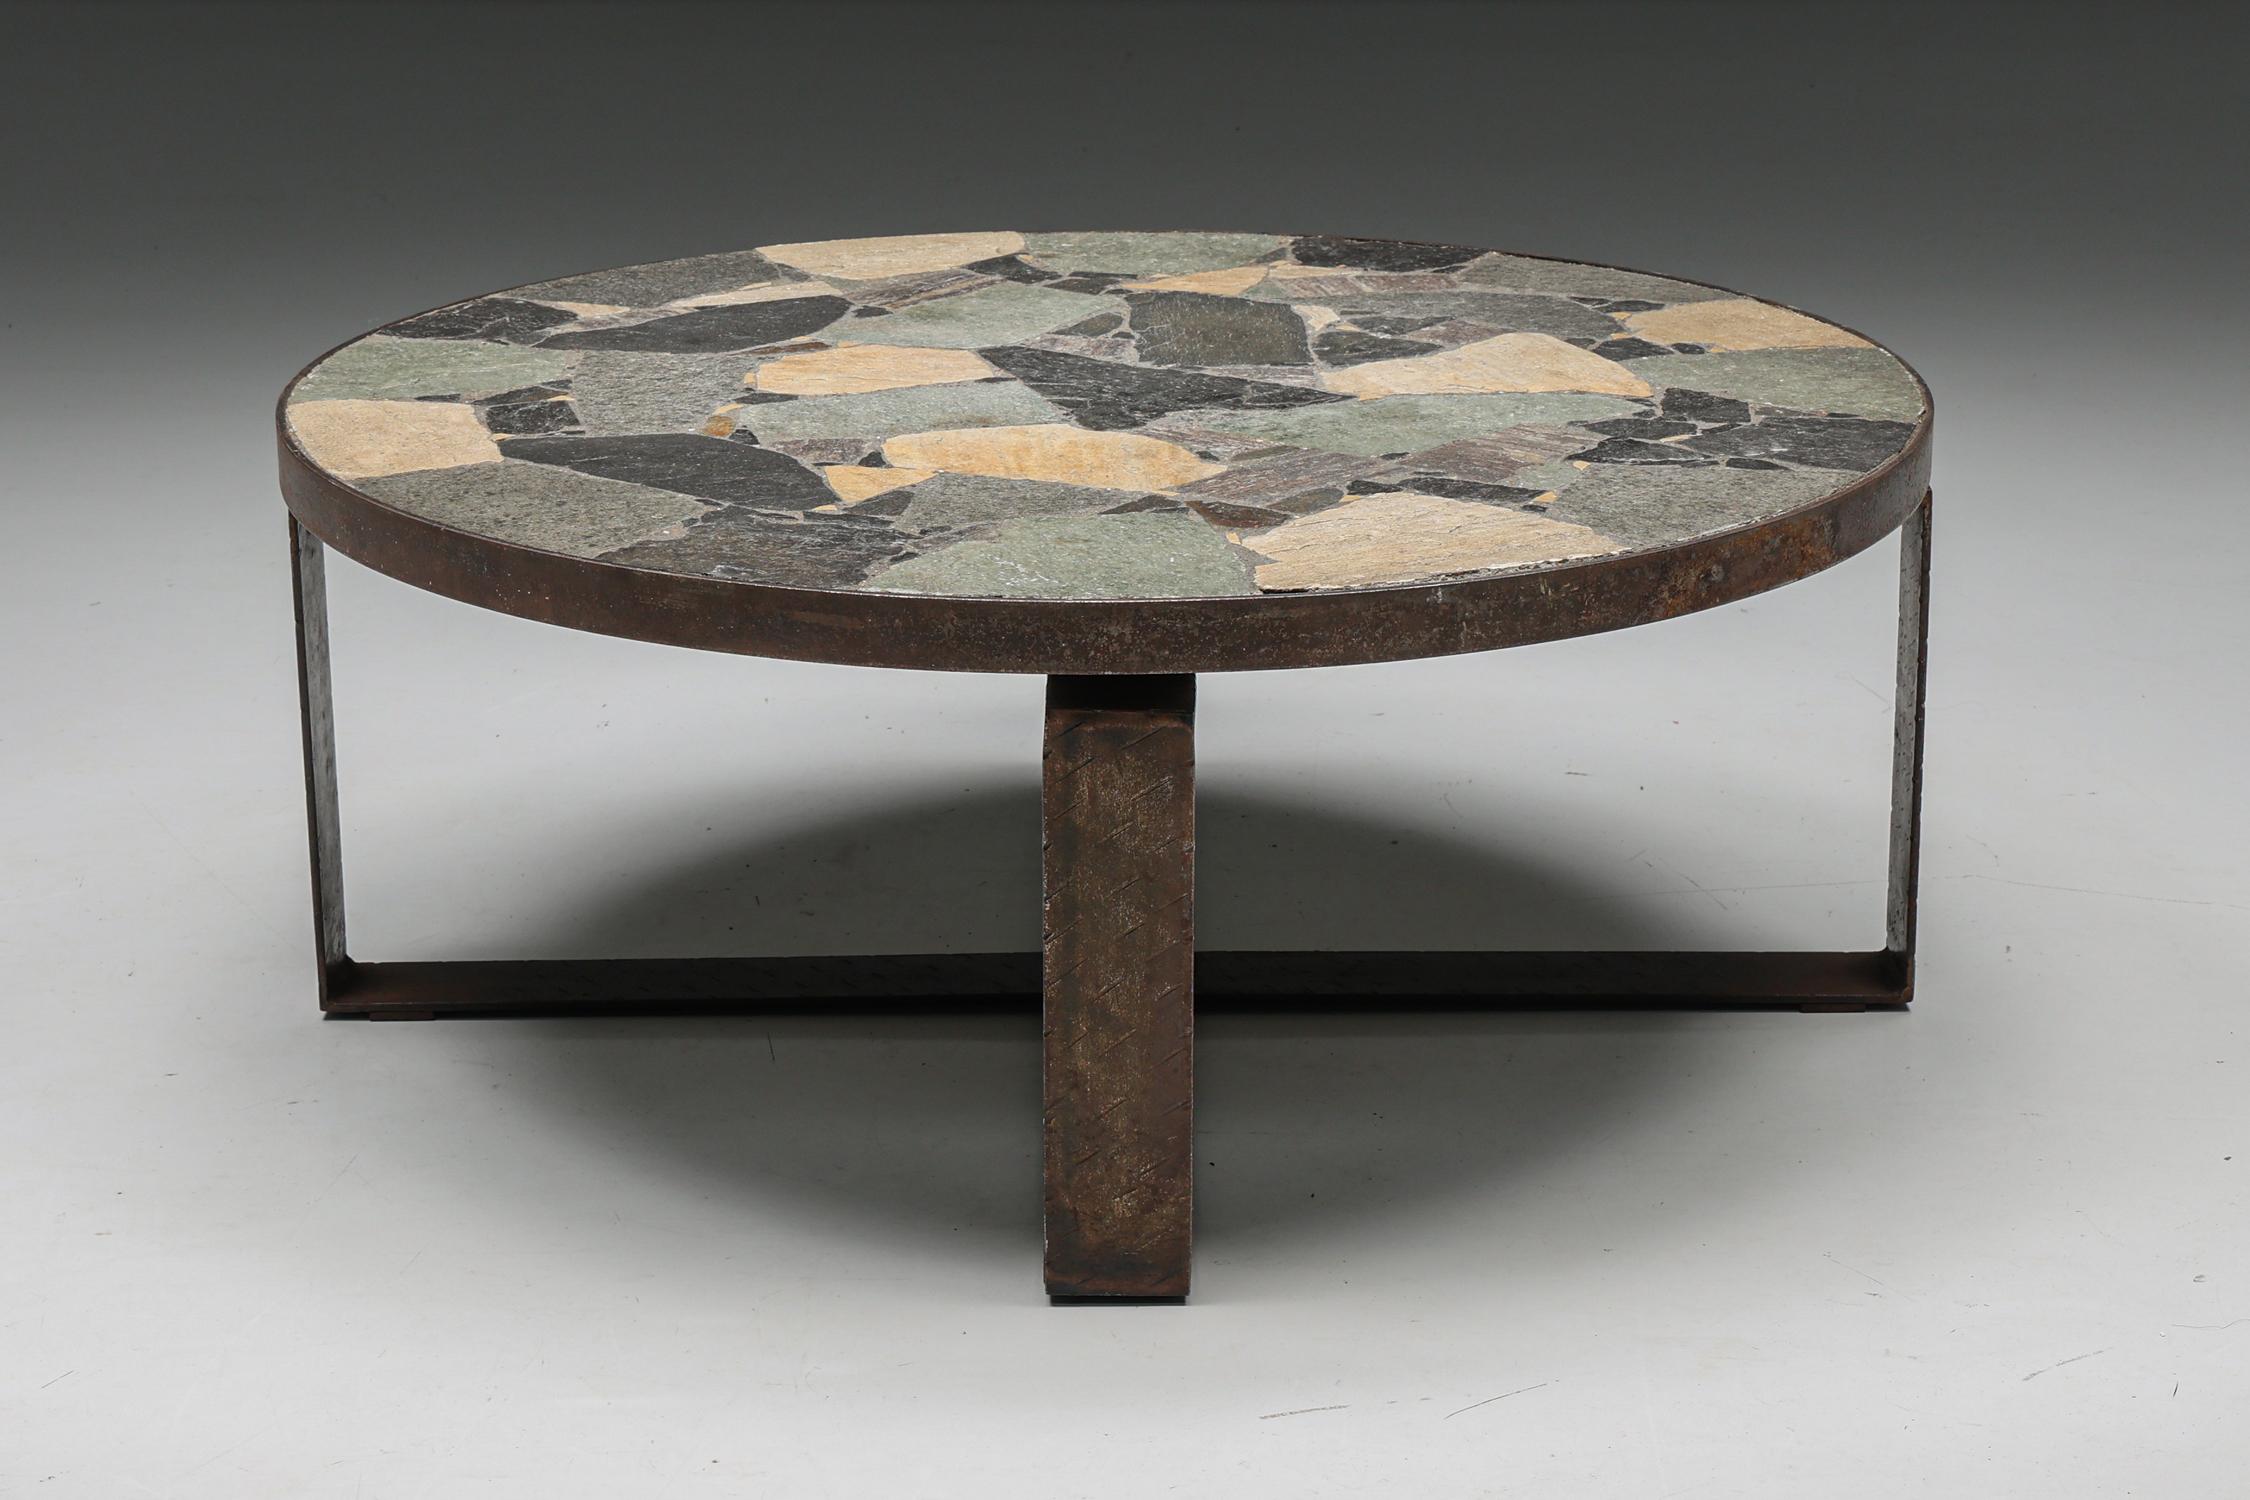 Italian design; Italy, Italian craftsmanship; Mosaic Stone Coffee Table; Iron; Mid-Century Modern; Italy; 1950's;

Italian coffee table with mosaic stone table top made in the 1950s. The round tabletop rests on an iron base and is lifted slightly